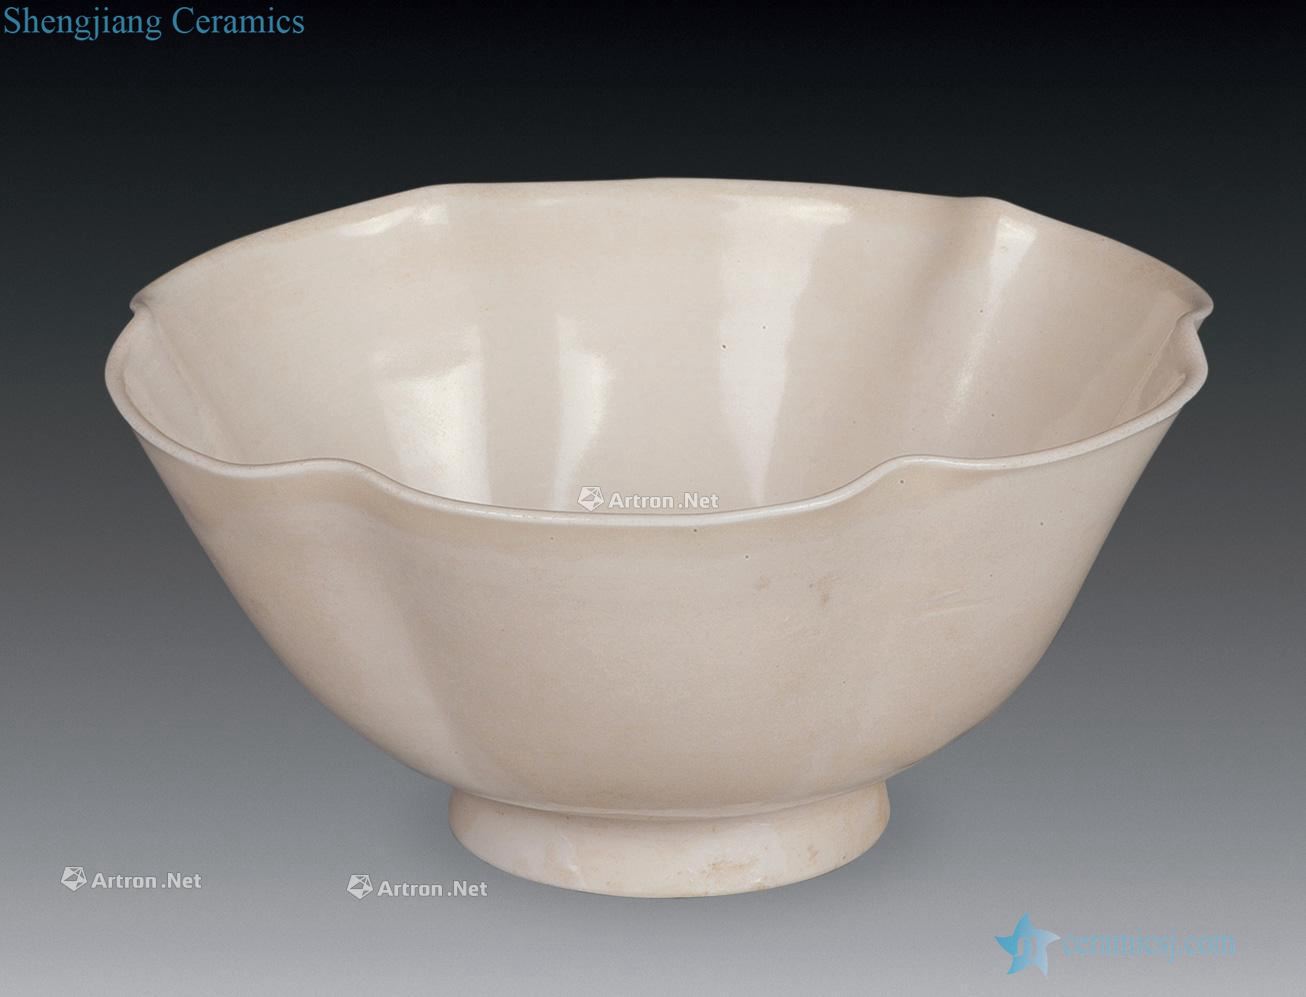 The five dynasties White glazed kwai separate bowls